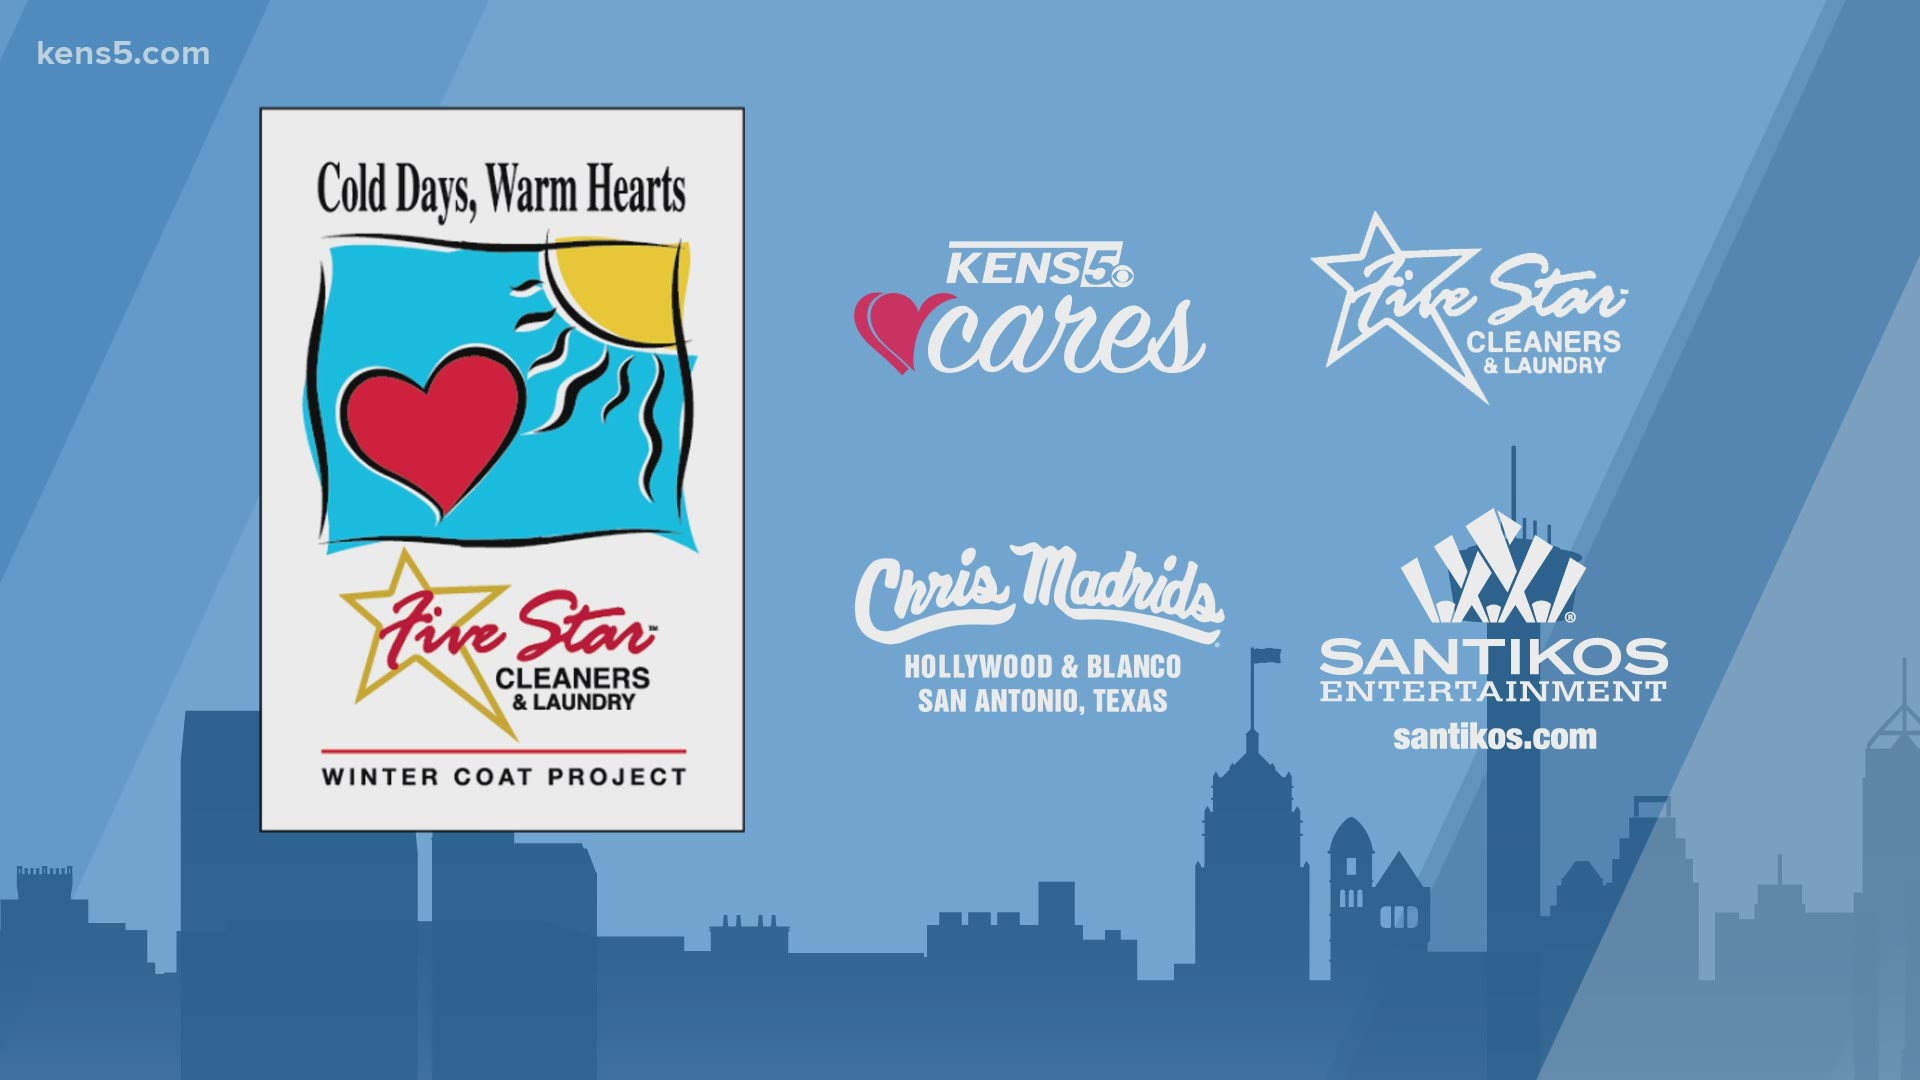 The Cold Days Warm Hearts Coat Drive is giving you a chance to put your old coats to good use.